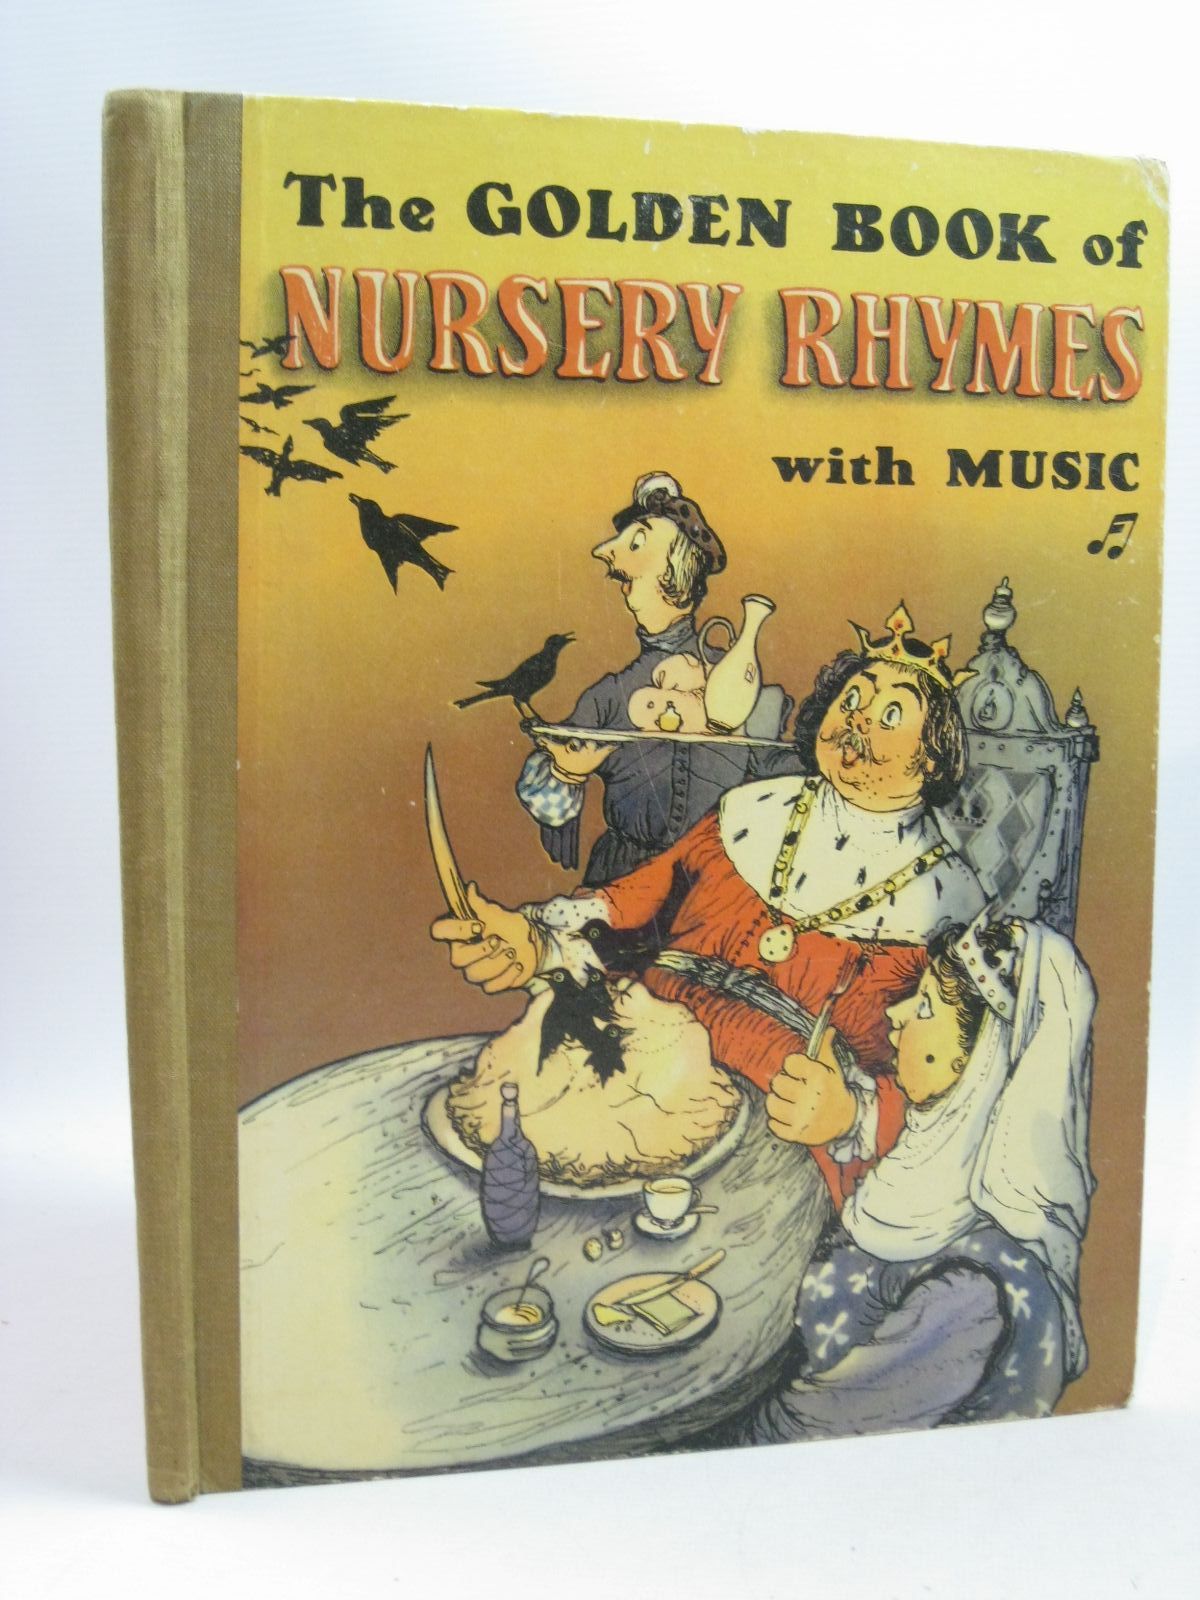 Photo of THE GOLDEN BOOK OF NURSERY RHYMES written by Micklem, T.C. illustrated by Carlton, J.R. published by Blandford Press Ltd. (STOCK CODE: 1504824)  for sale by Stella & Rose's Books